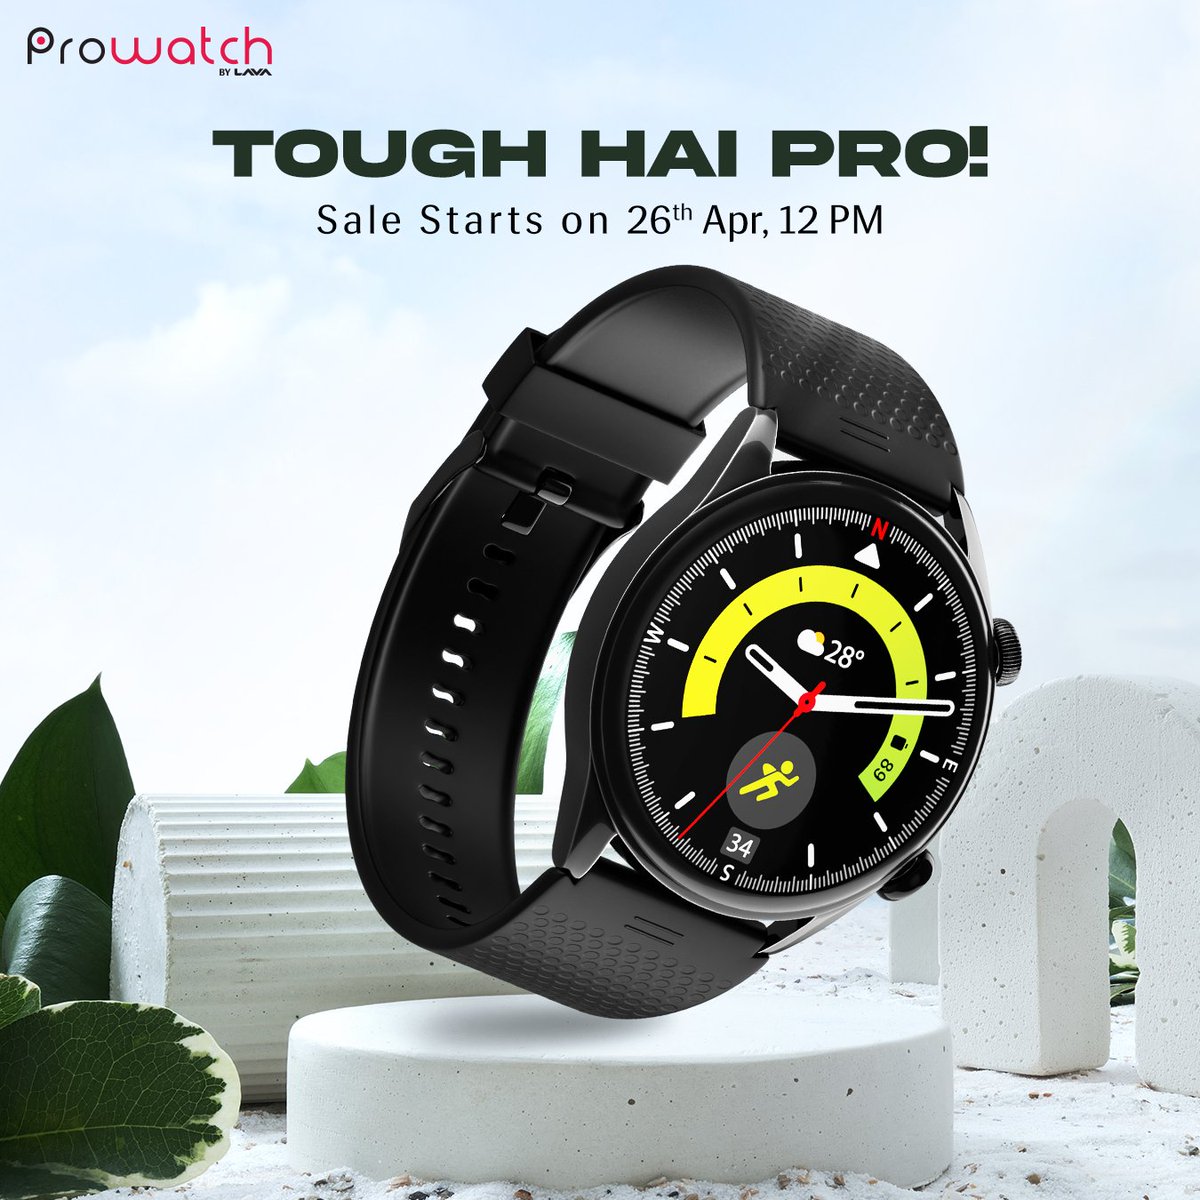 This Prowatch is waiting to be added to your cart! Sale starts 26th April, 12 PM onwards. Save the date and get ready to go pro! Register now: bit.ly/3QdQsBo Special Launch Offer: Starting ₹1,999 ✅Corning® Gorilla® Glass 3 ✅3.63cm (1.43”) 2.5D Curved AMOLED Always